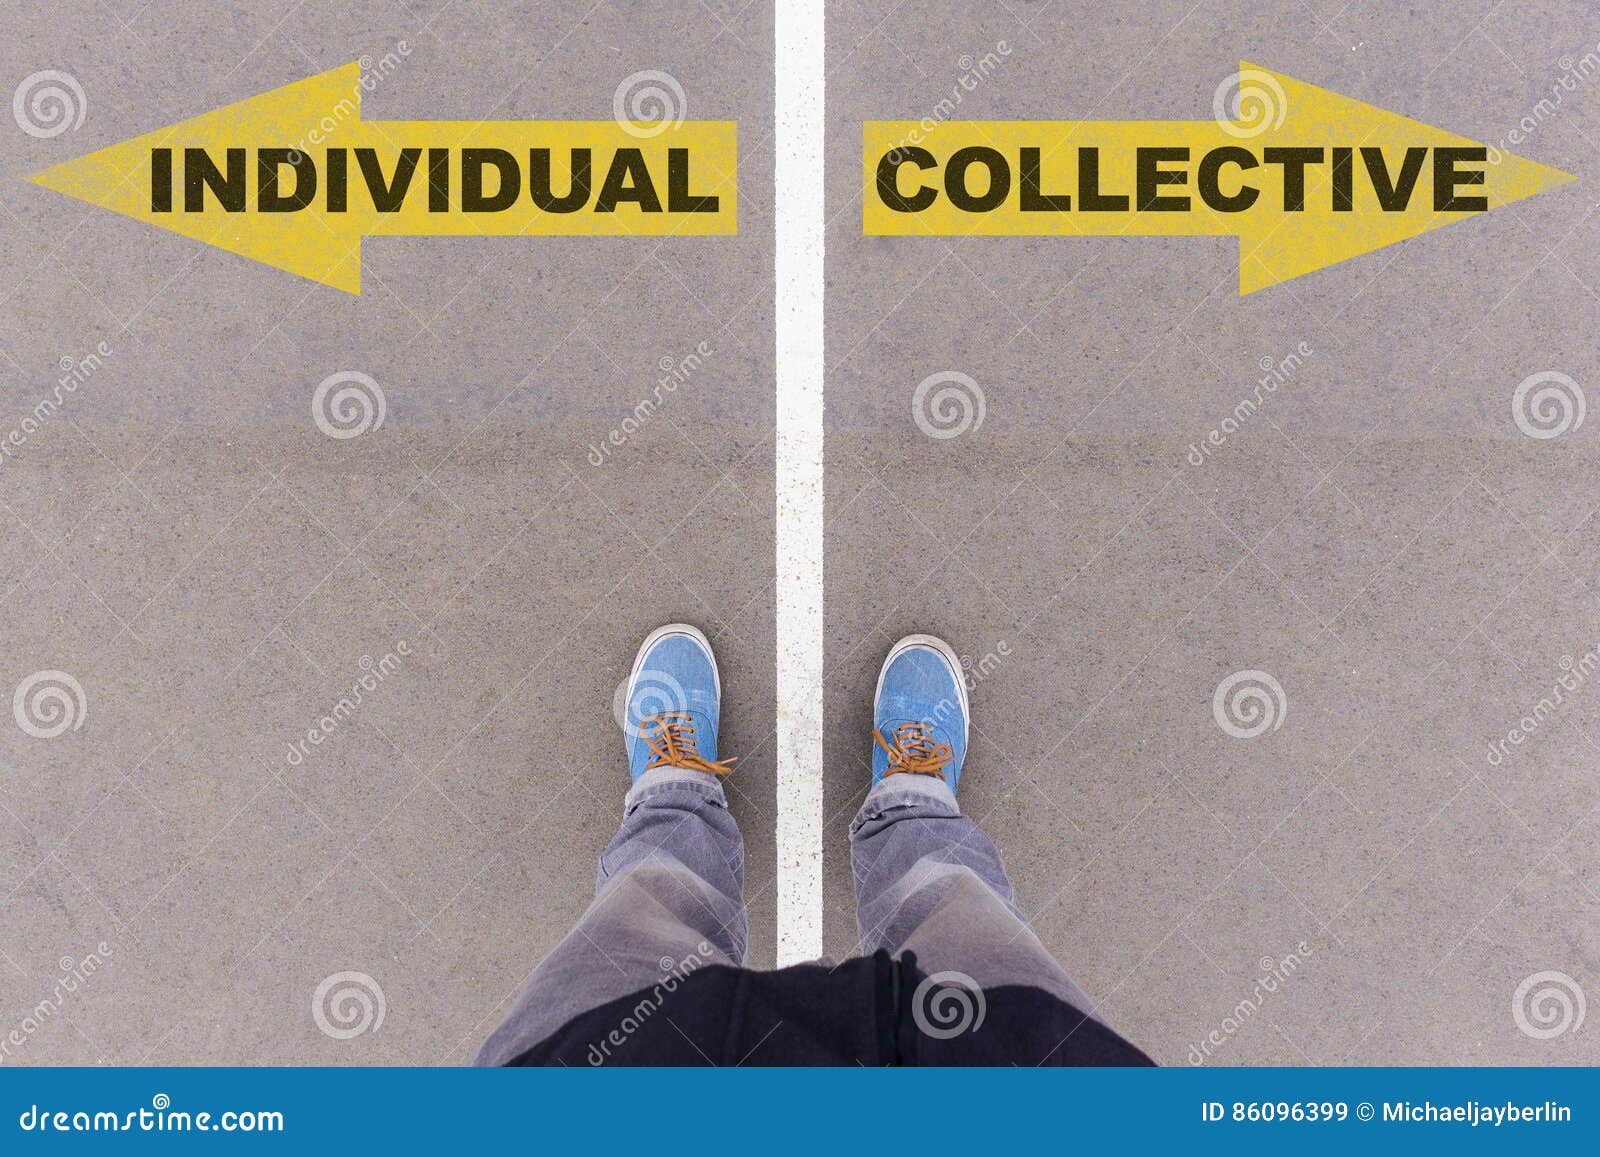 individual vs collective text arrows on asphalt ground, feet and